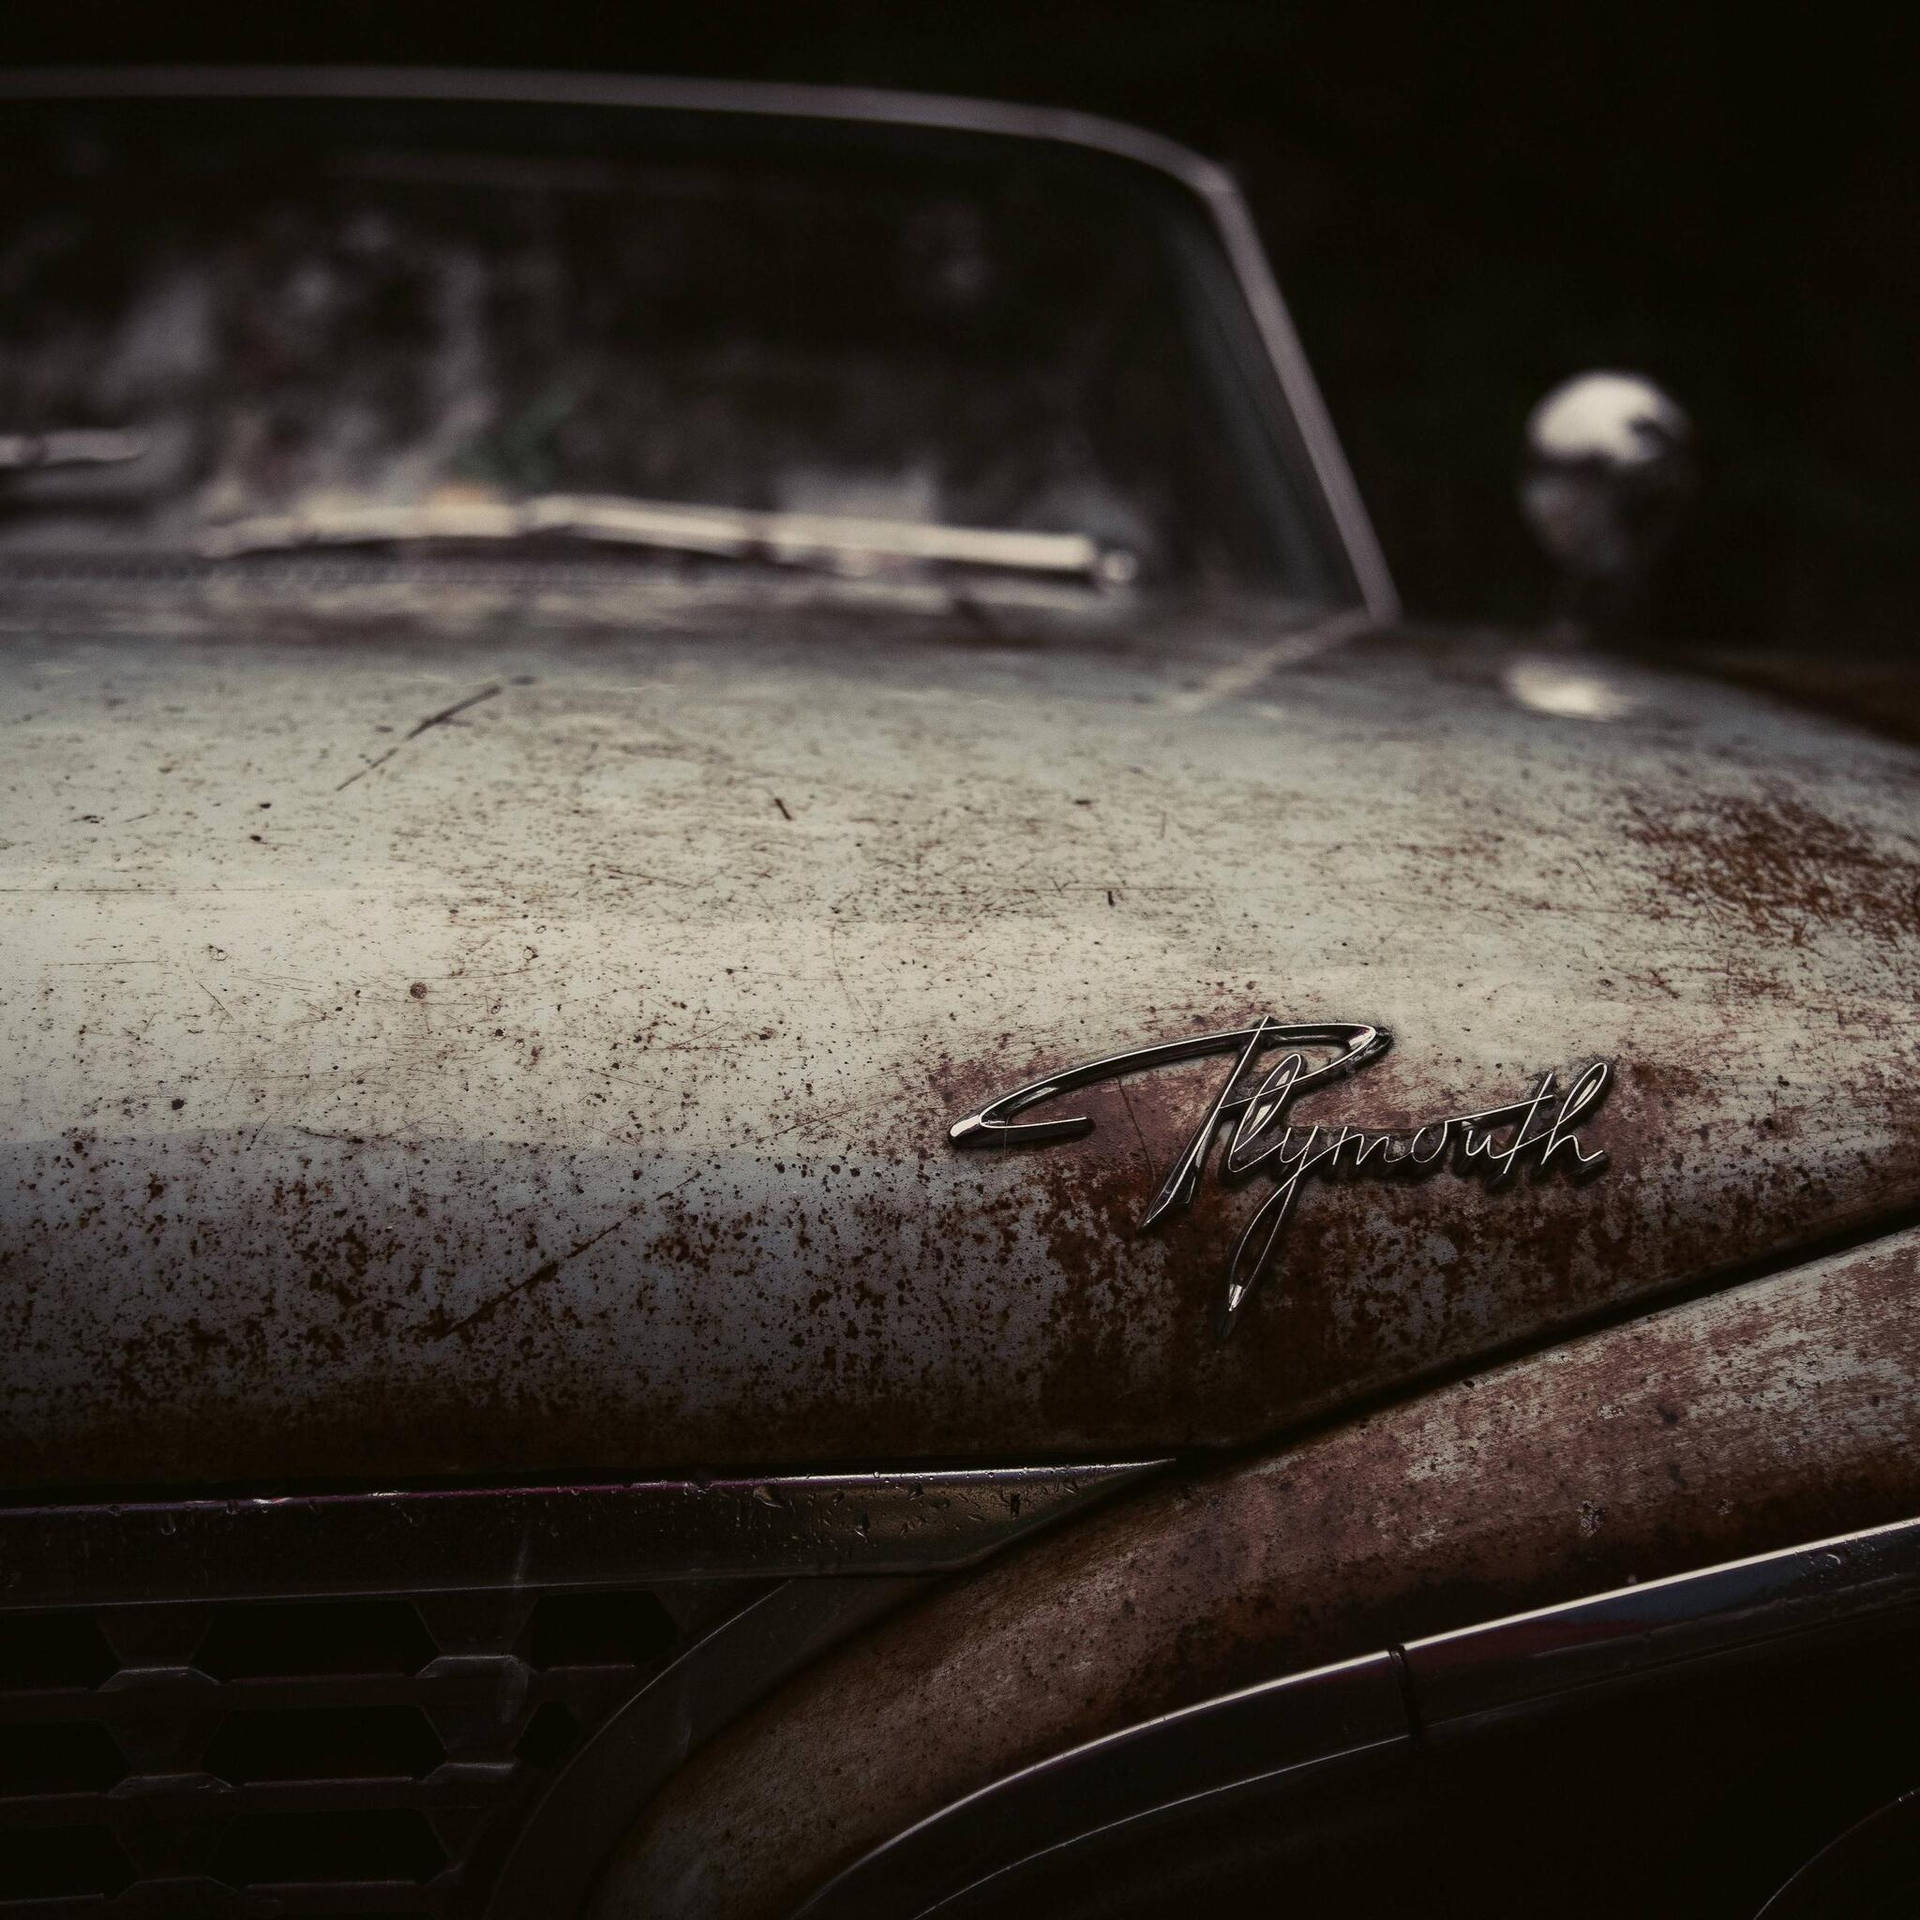 4k Plymouth Car Hood Close-up Background